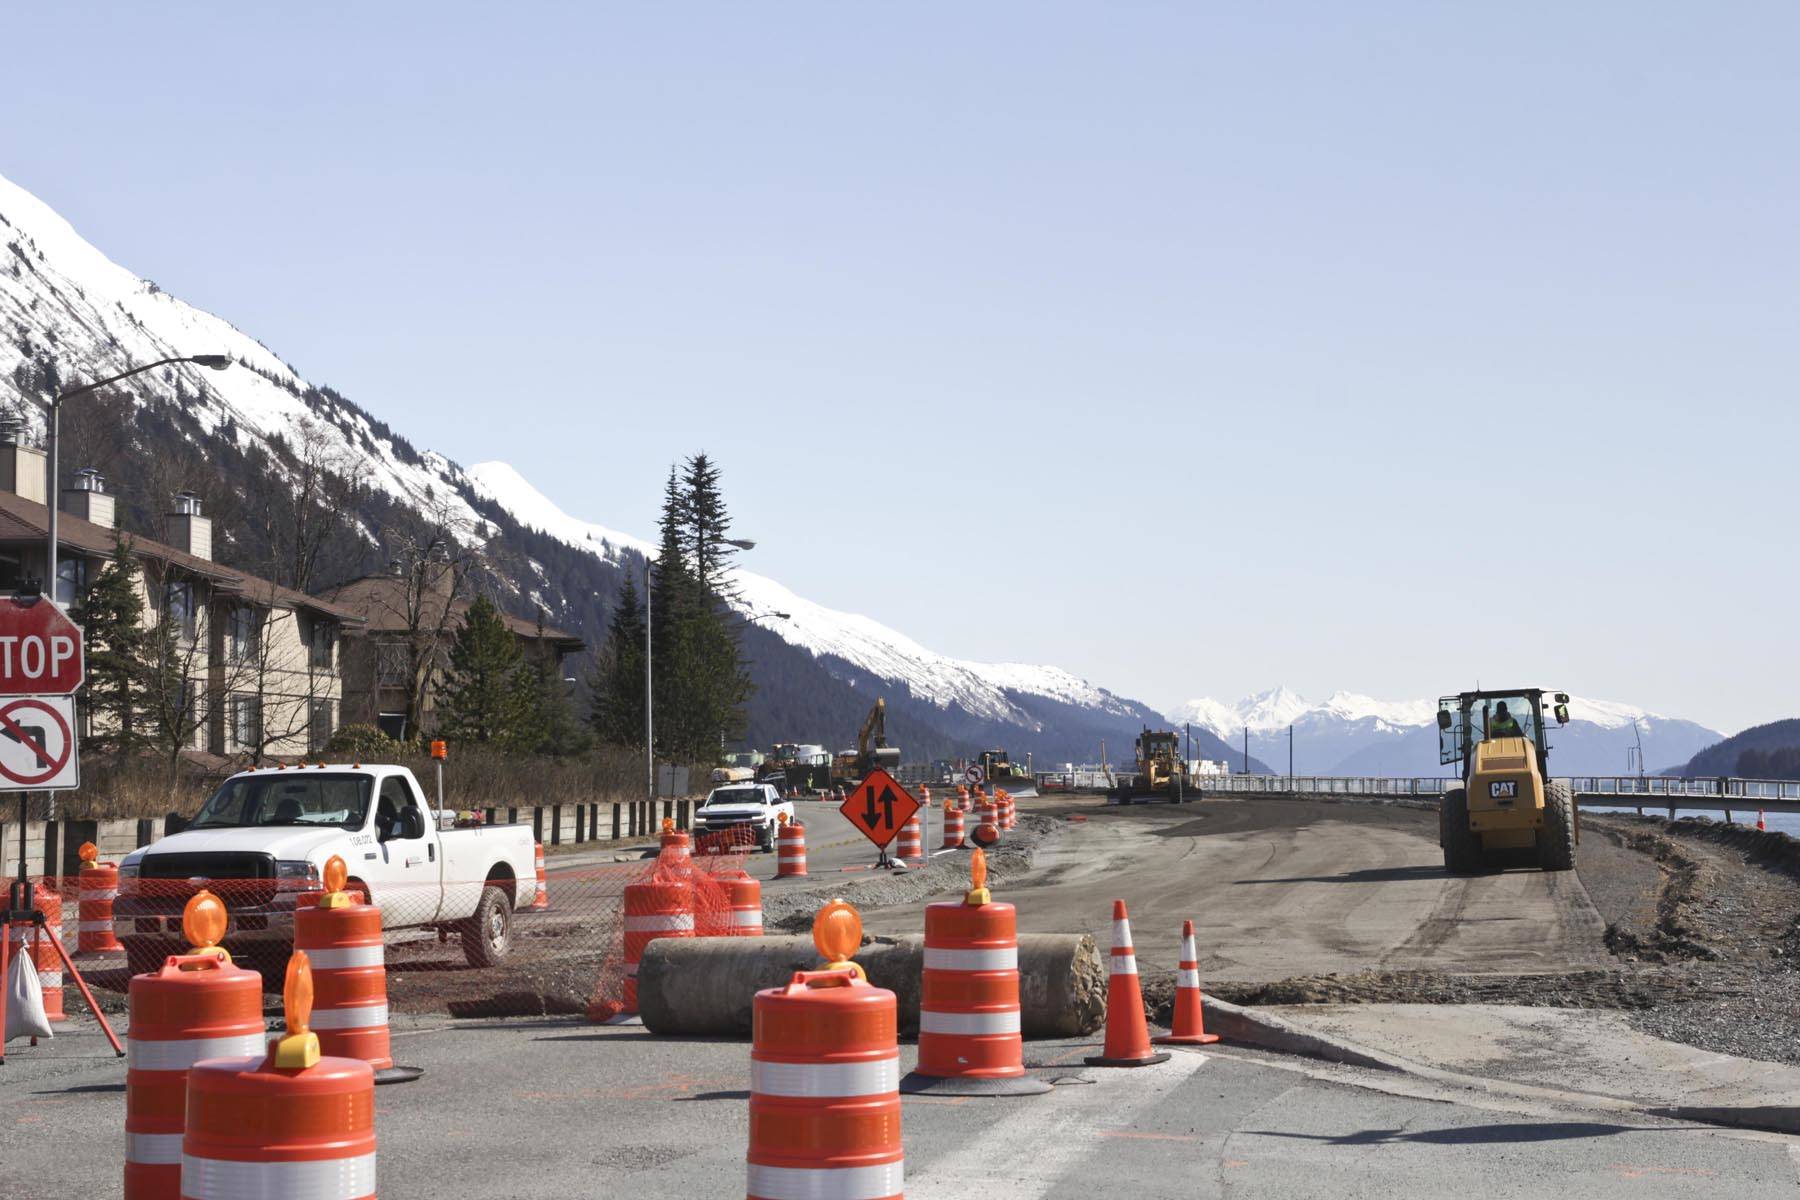 With the spring thaw, the Alaska Department of Transportation has resumed work on Egan Drive, April 10, 2020. (Michael S. Lockett | Juneau Empire)